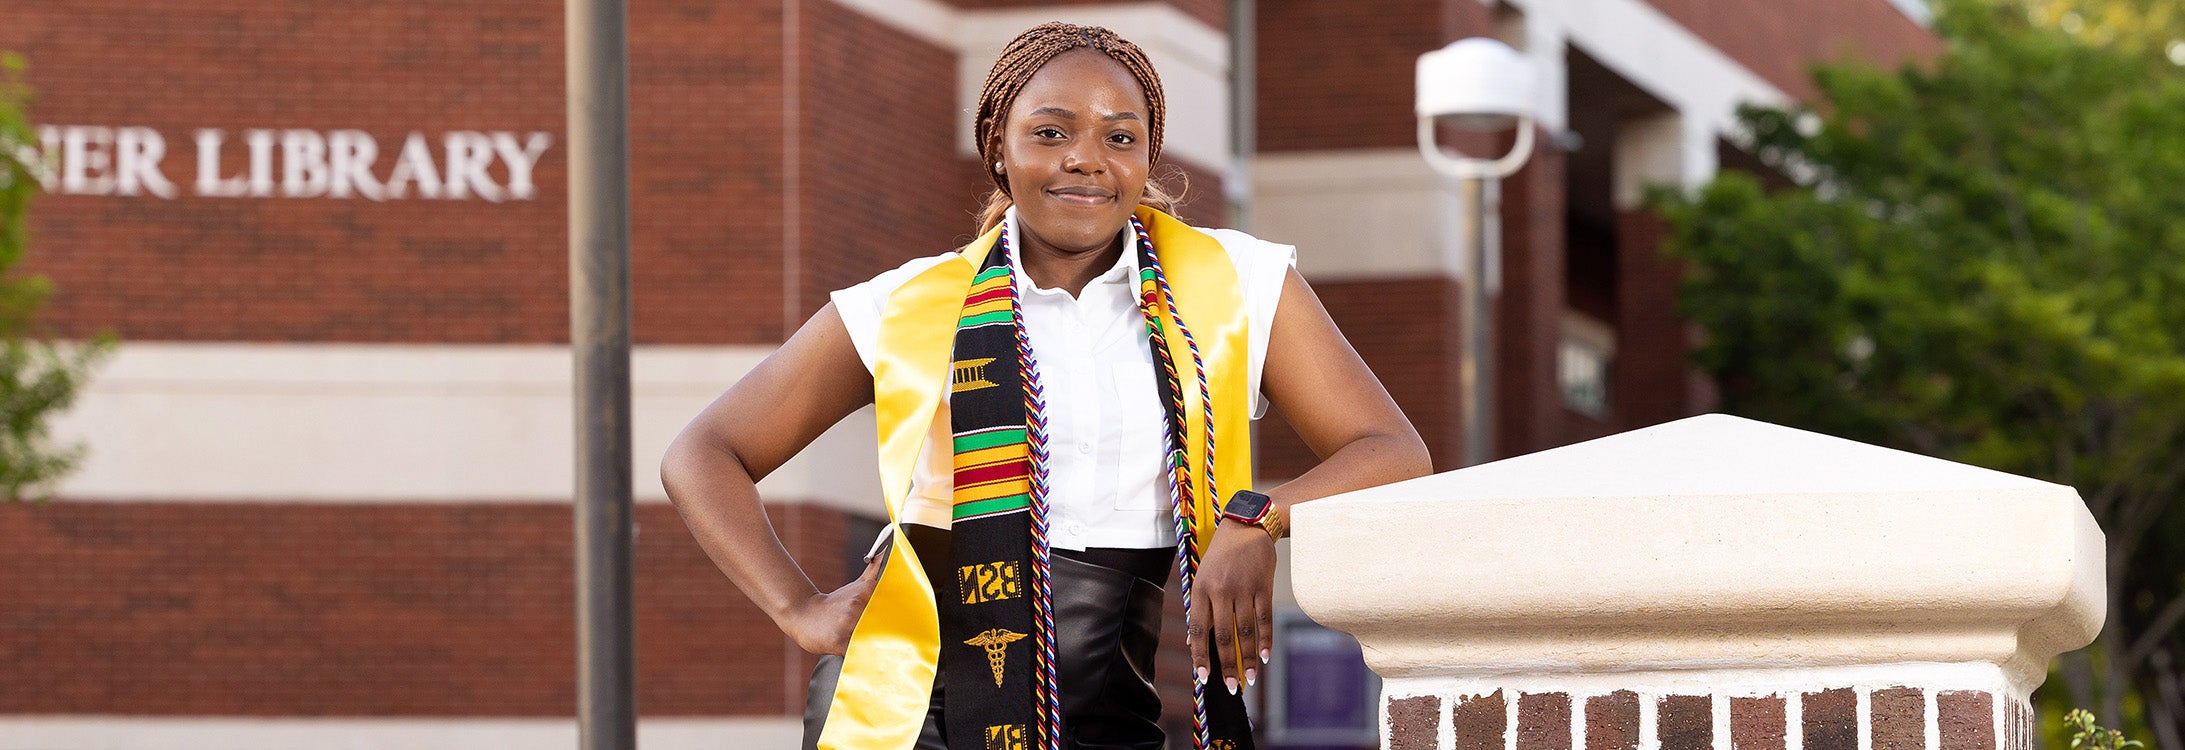 East Carolina University College of Nursing student Esther Olajide took on the extra challenge of a military deployment in Africa while pursuing her degree.